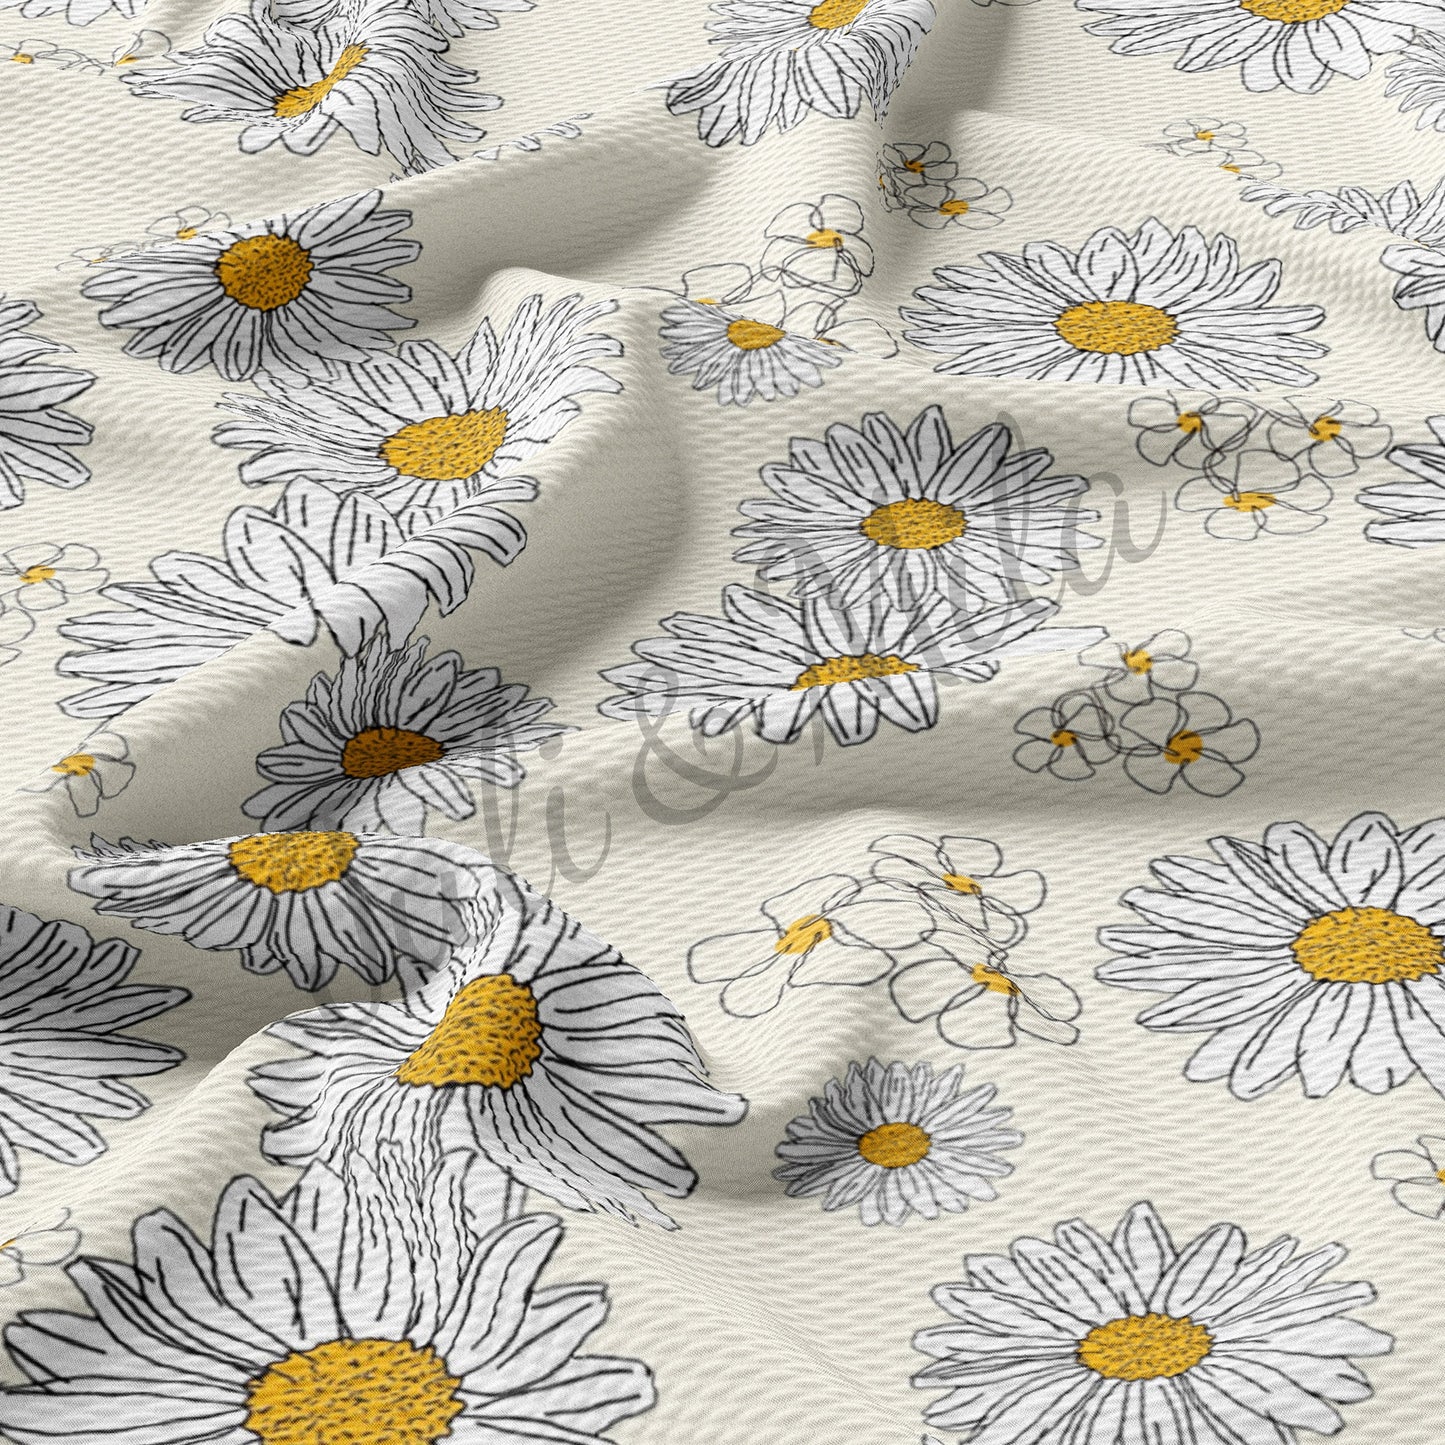 Floral Bullet Textured Fabric Floral79